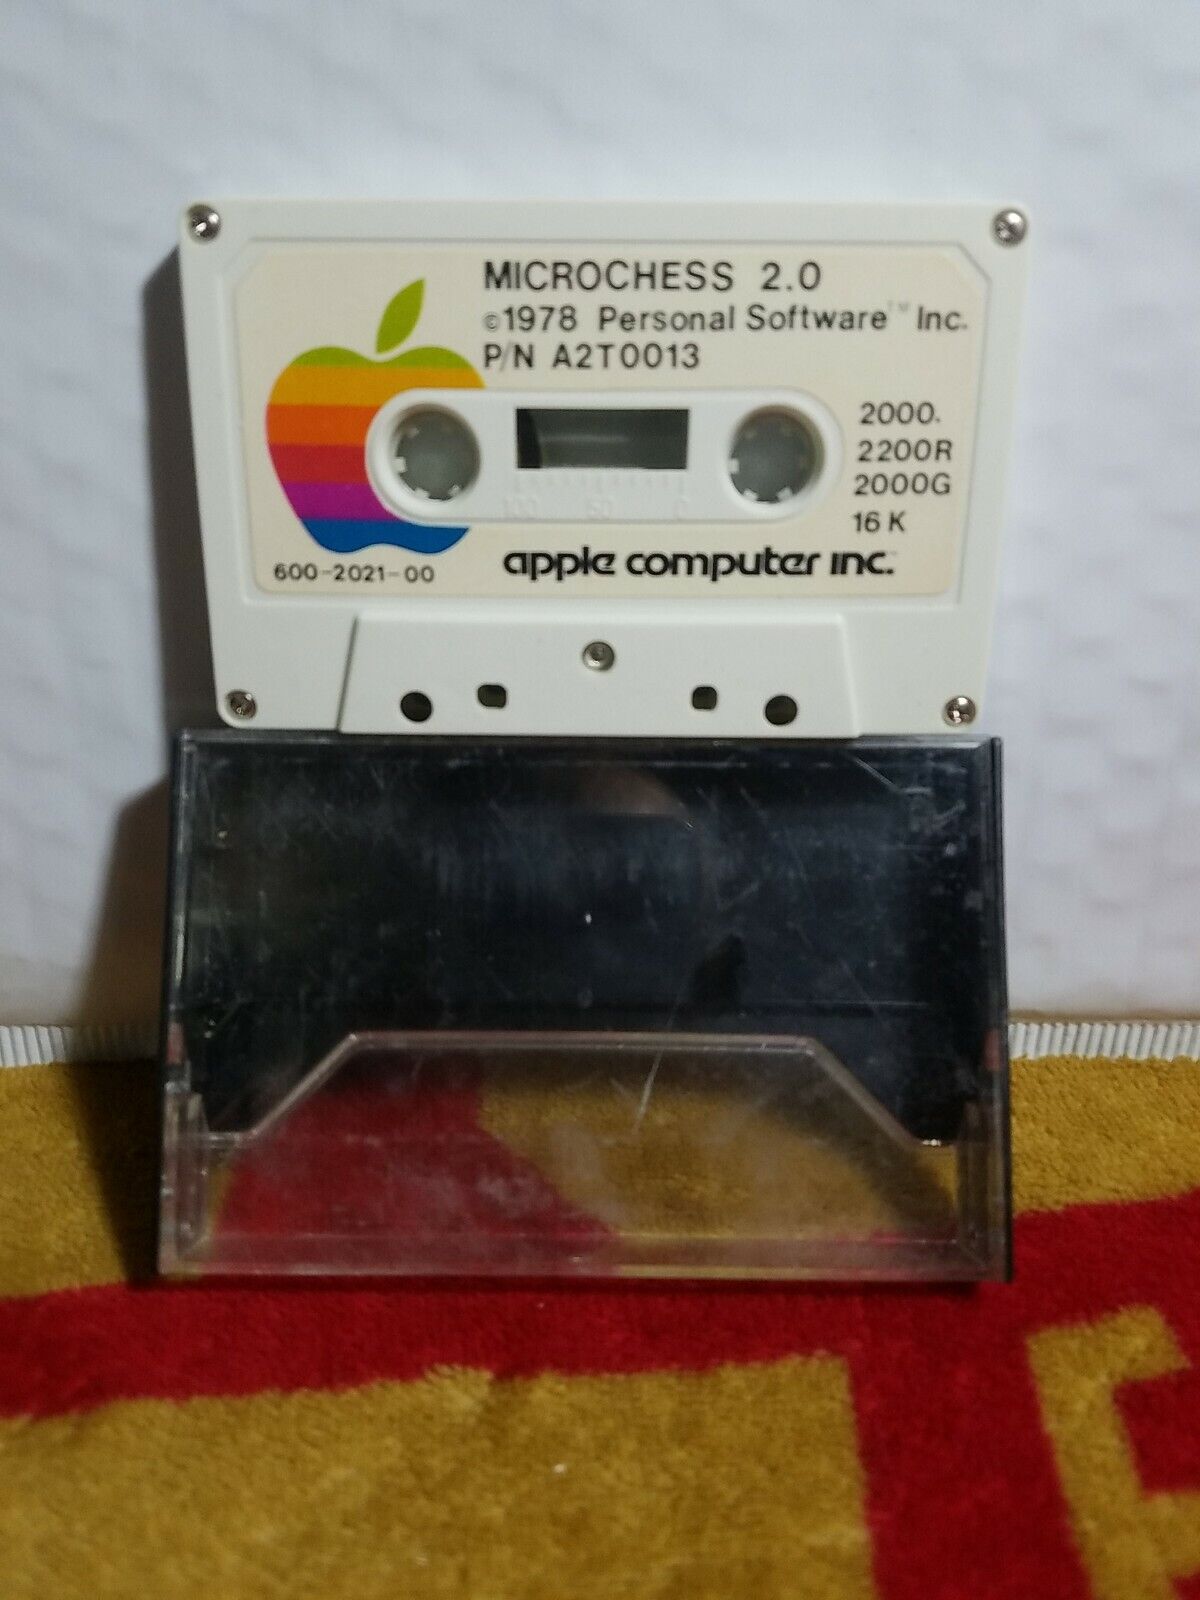 Apple Microchess 2.0 1978 Personal Software Cassette P/N A2T0013